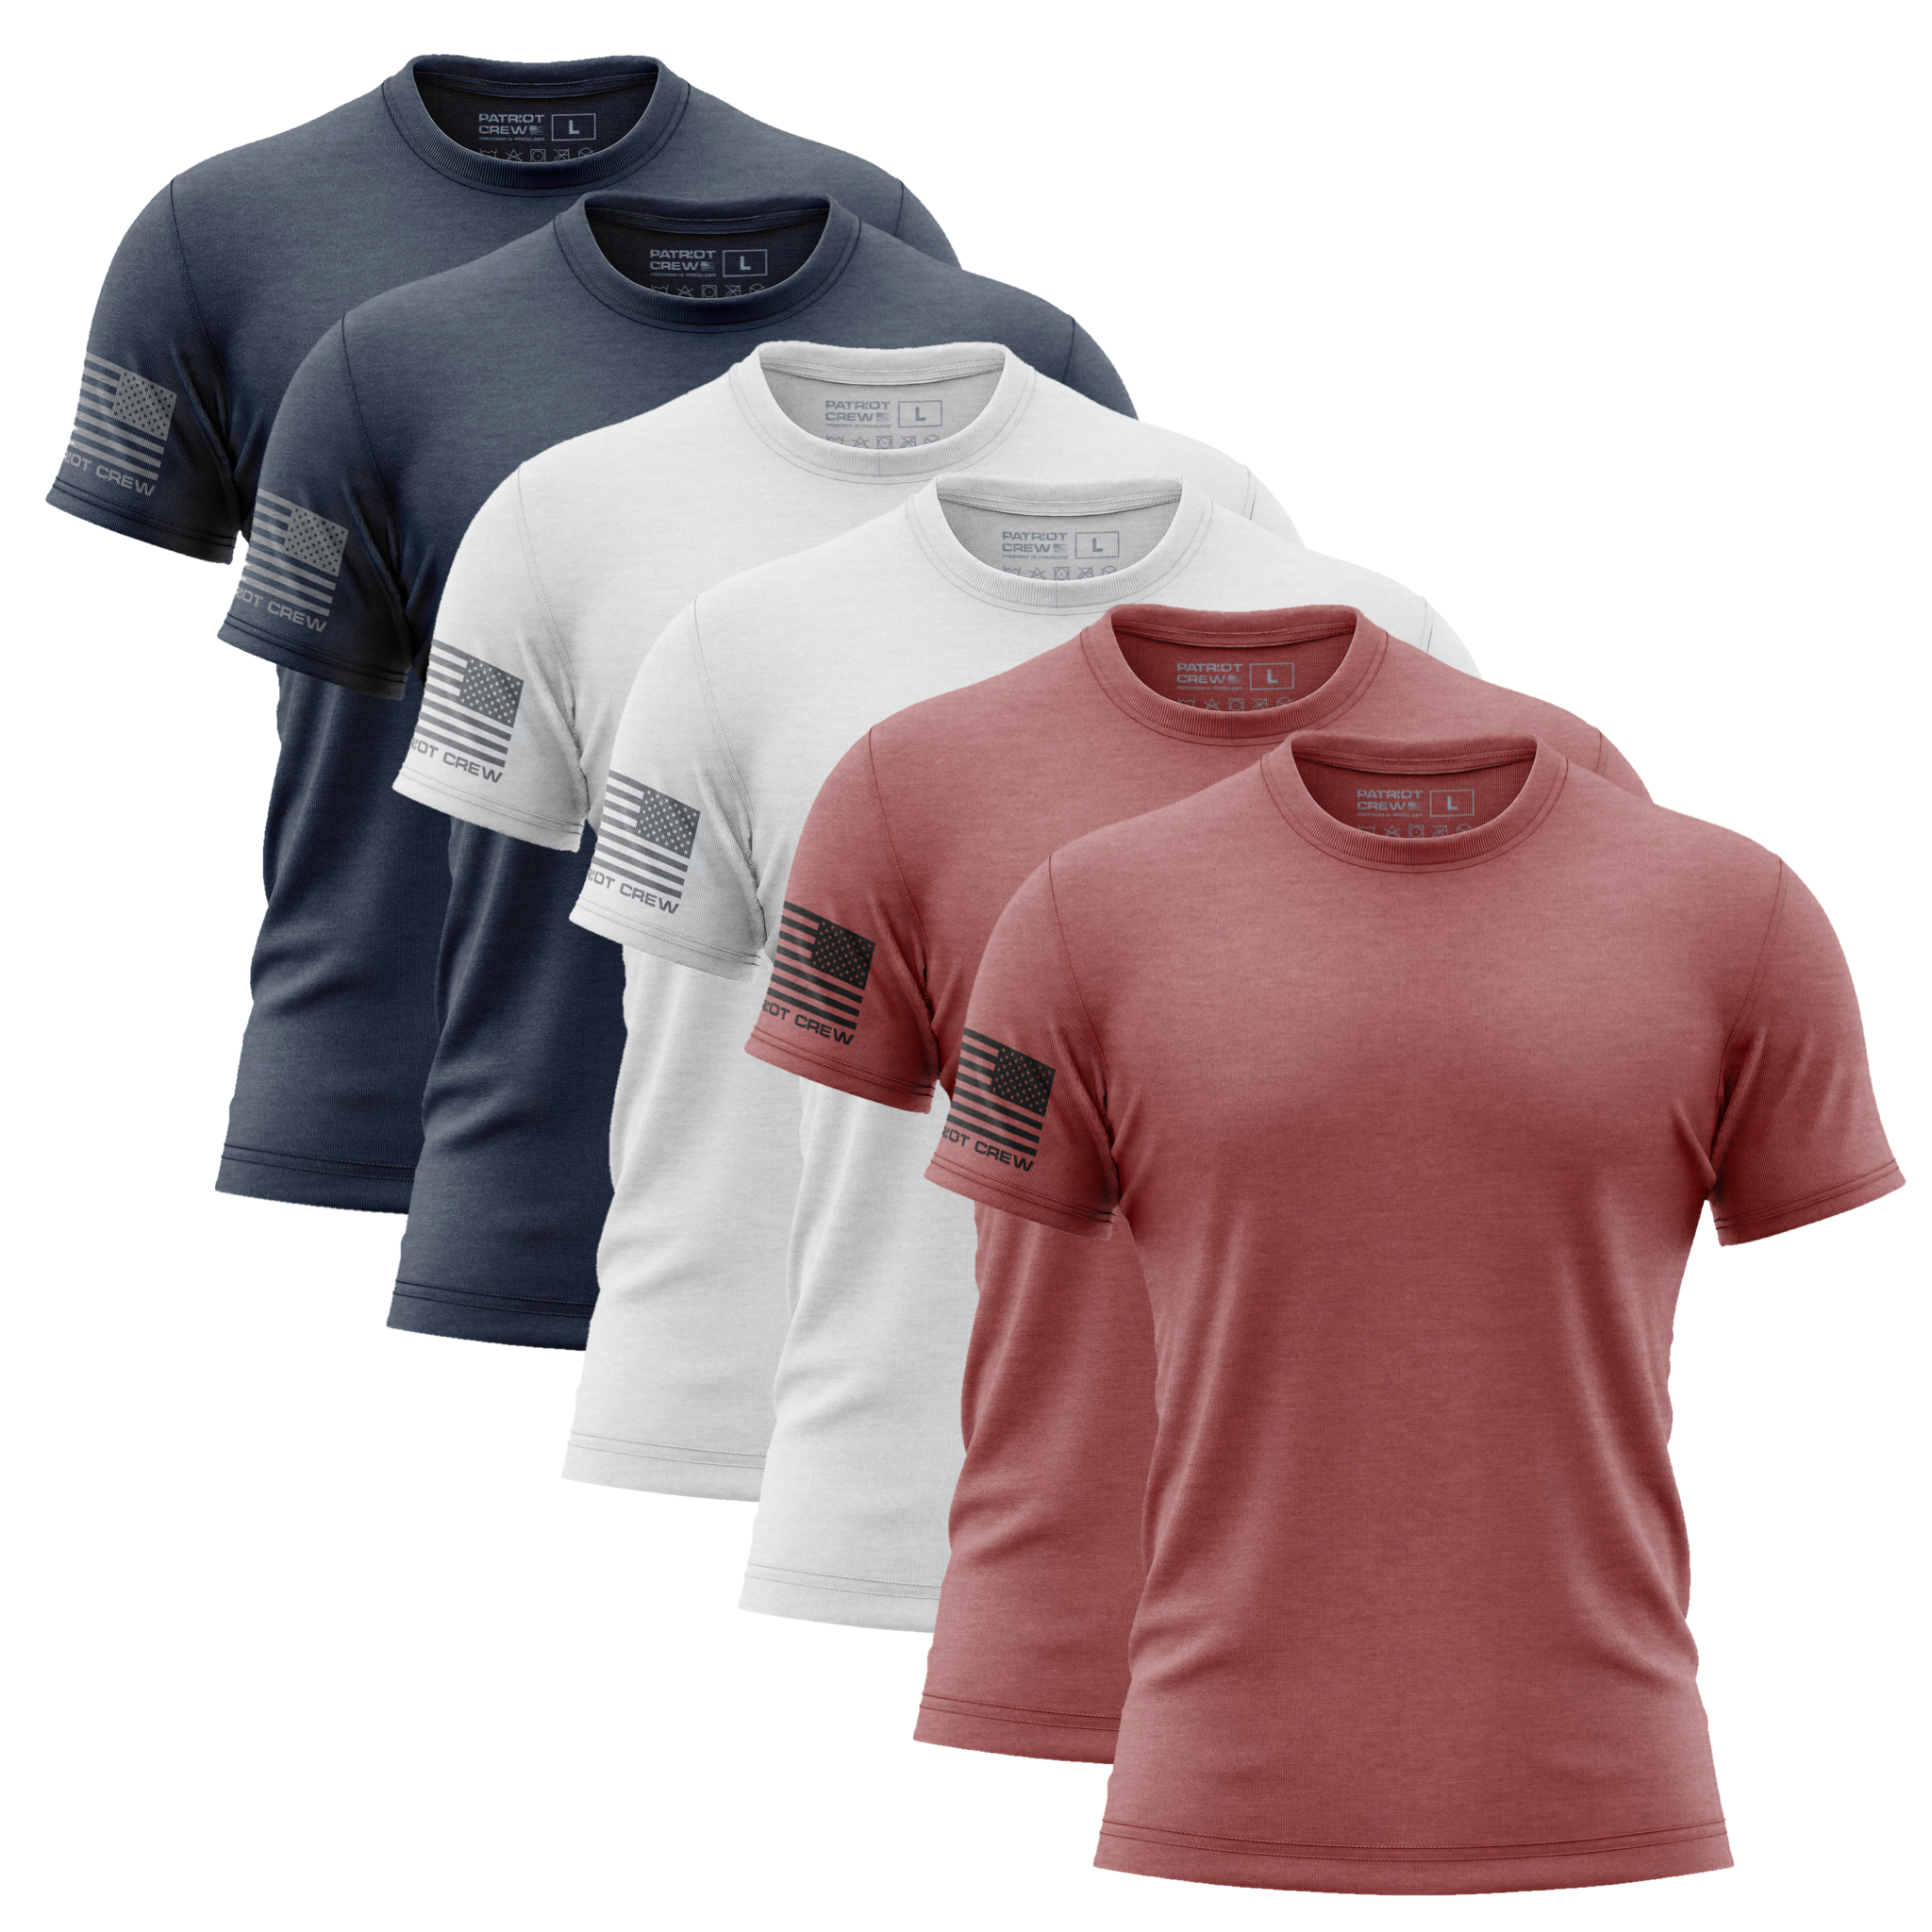 Image of Red, White, & Blue T-Shirt (6 Pack)